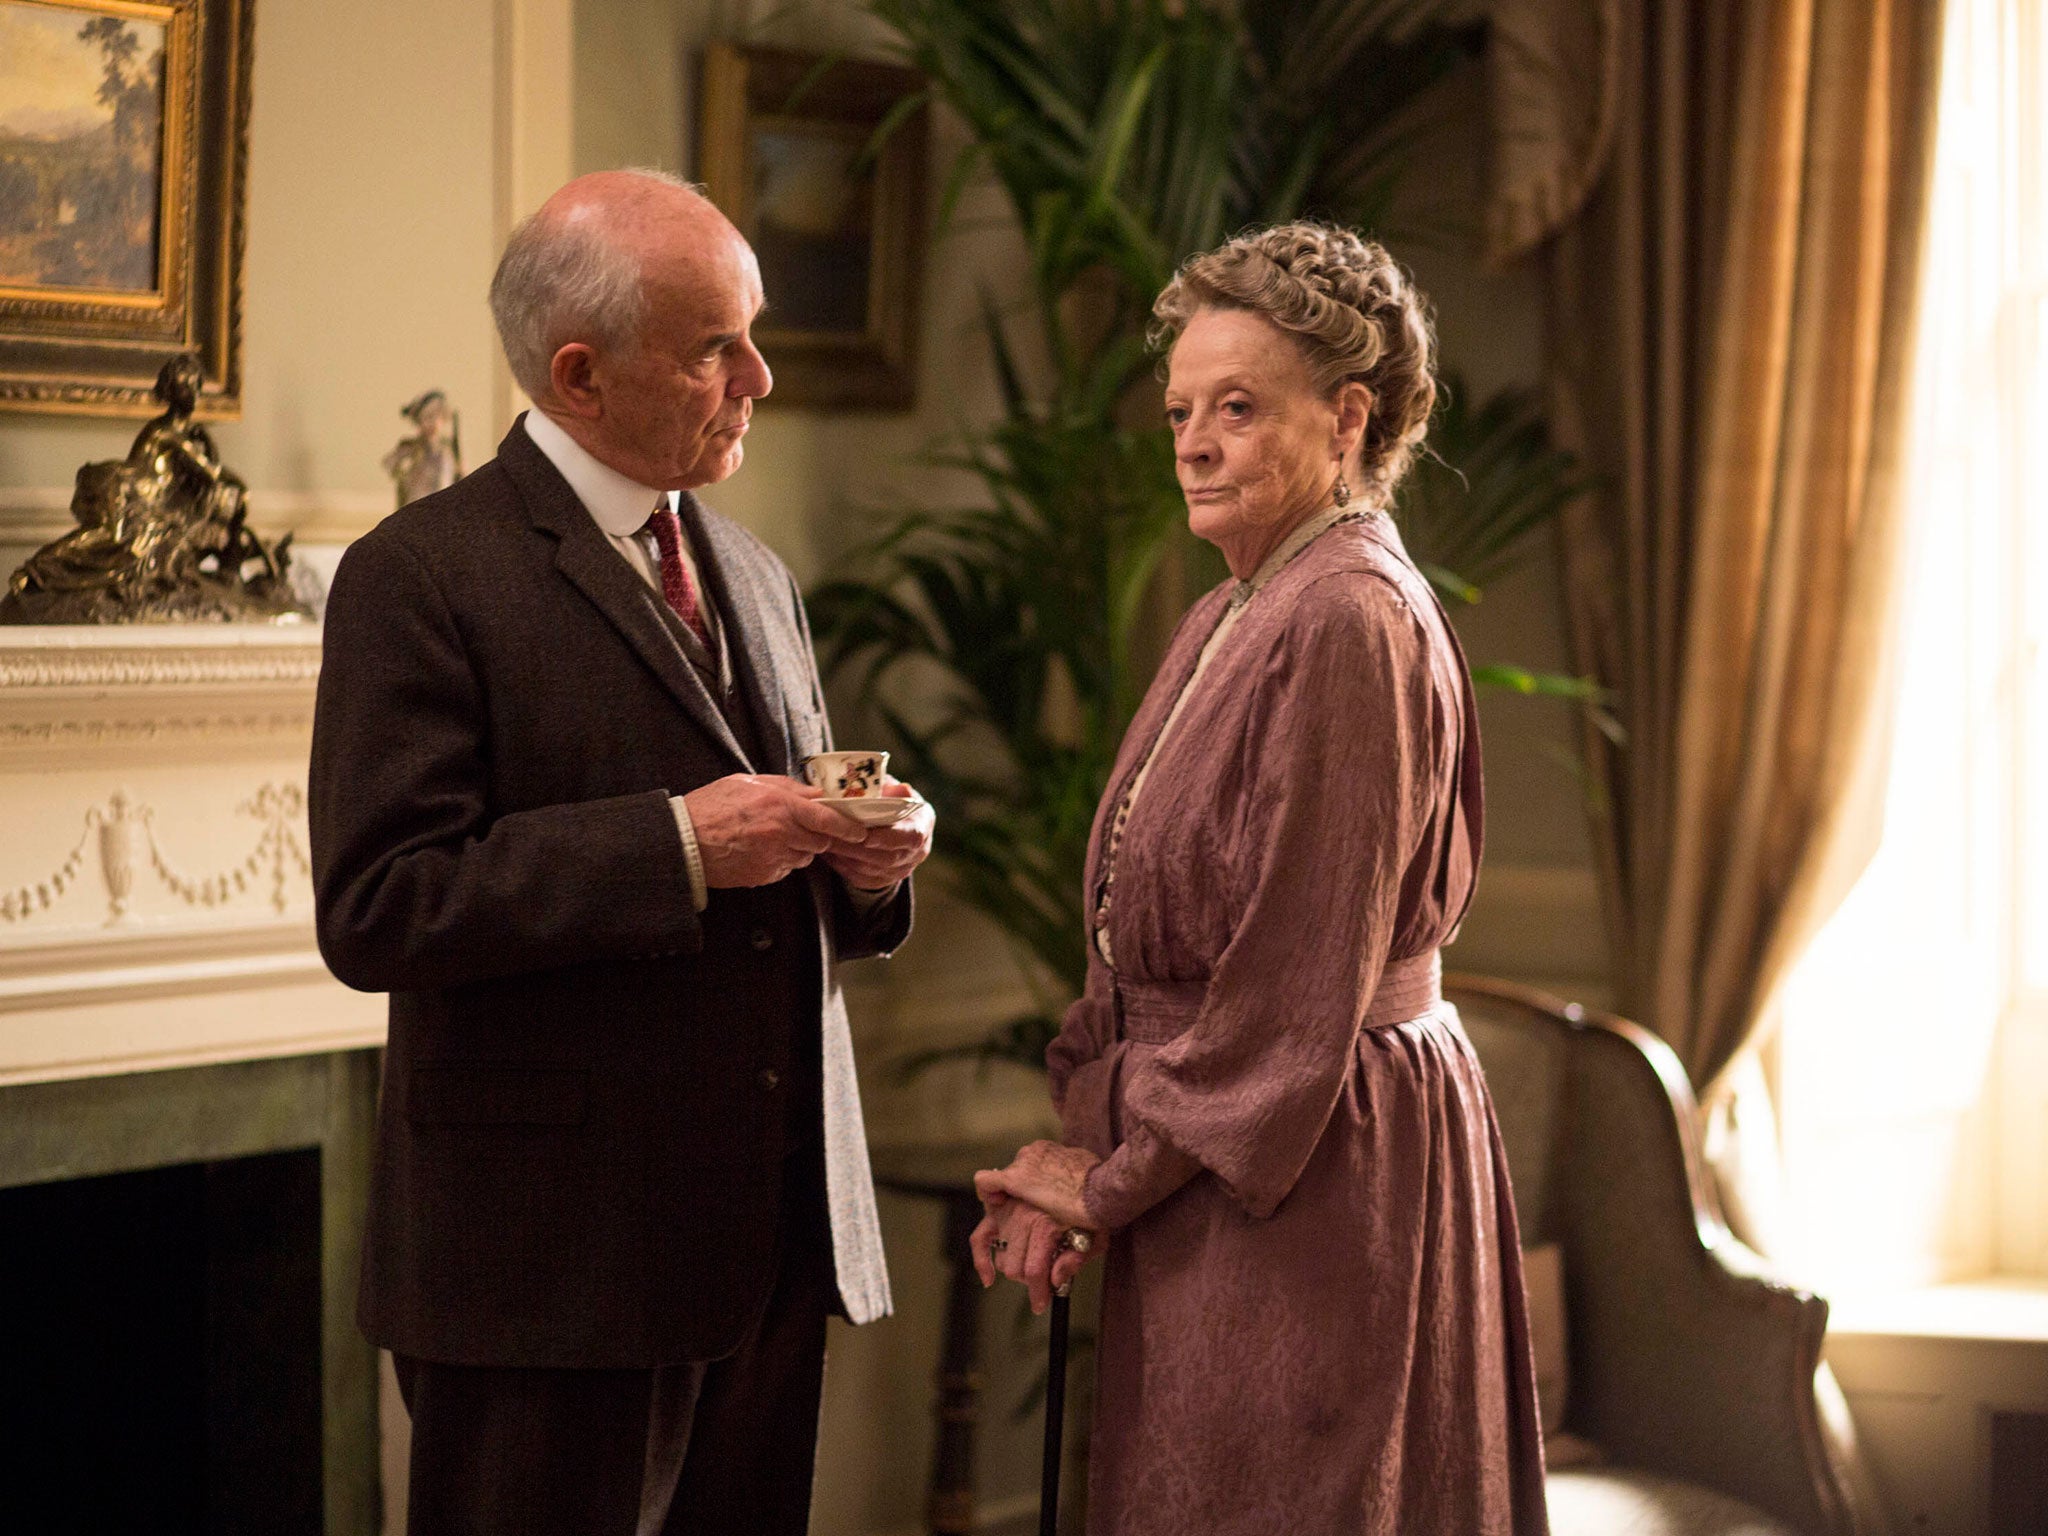 Downton Abbey Series 5 Episode 1 Itv Review There S Revolution In The Air But One Lady S